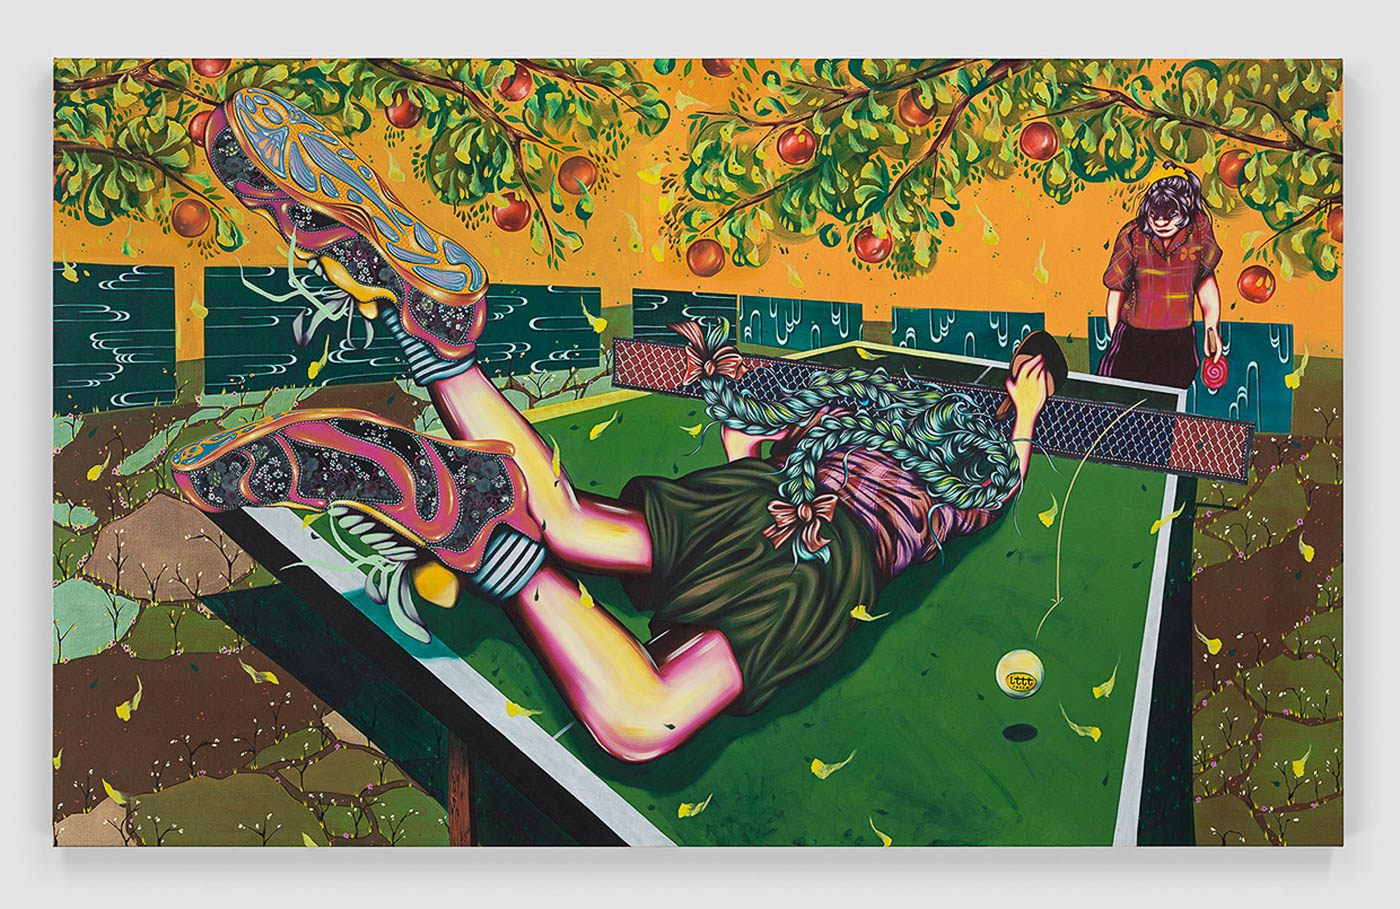 a painting of a person diving onto a ping pong table